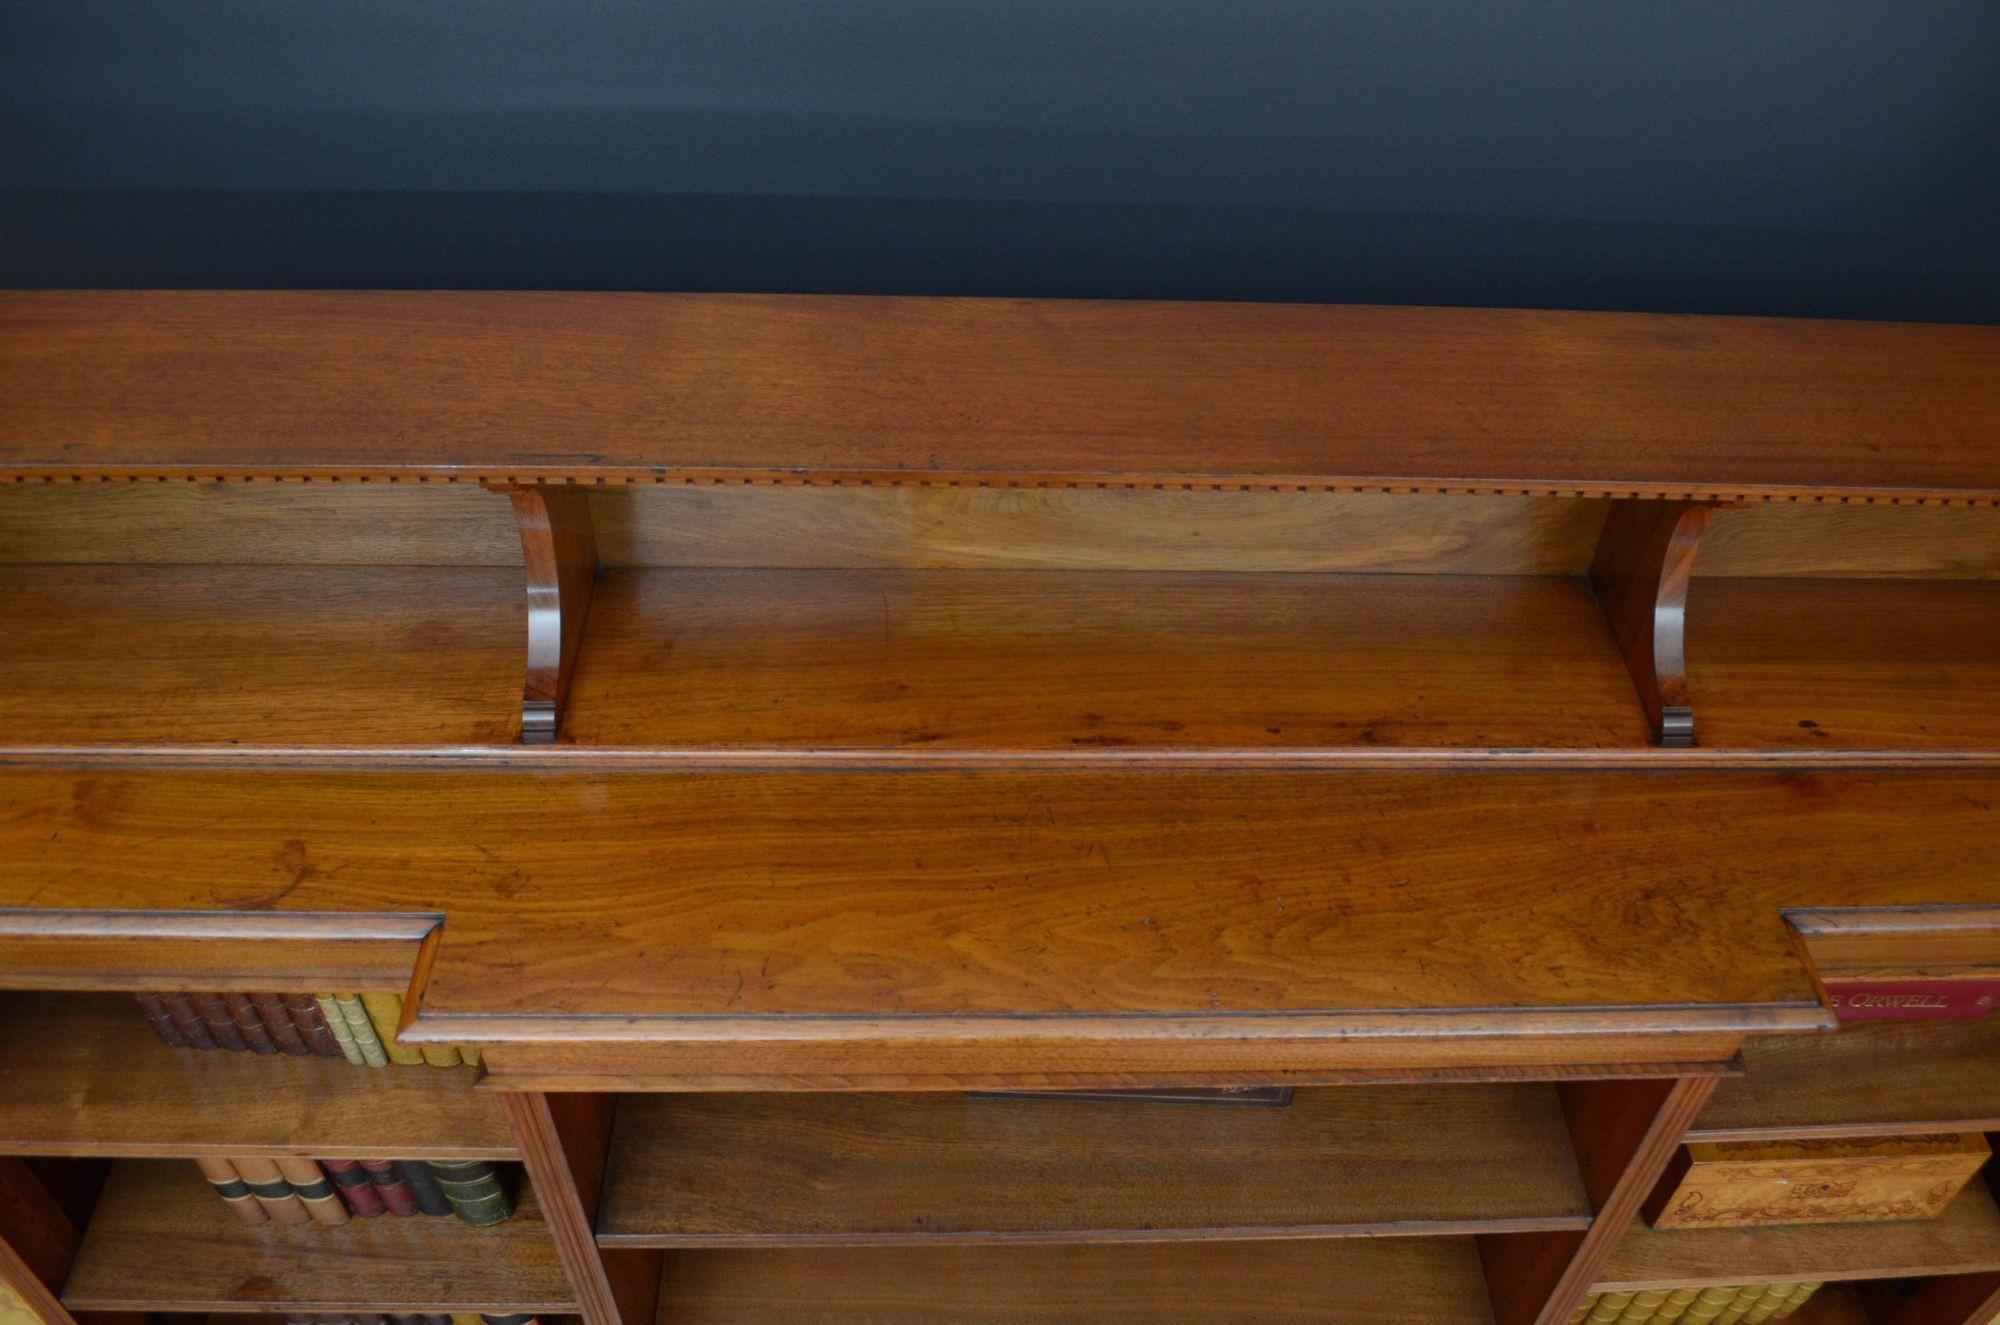 Walnut A quality walnut bookcase by Morris and co, designed by George Jack